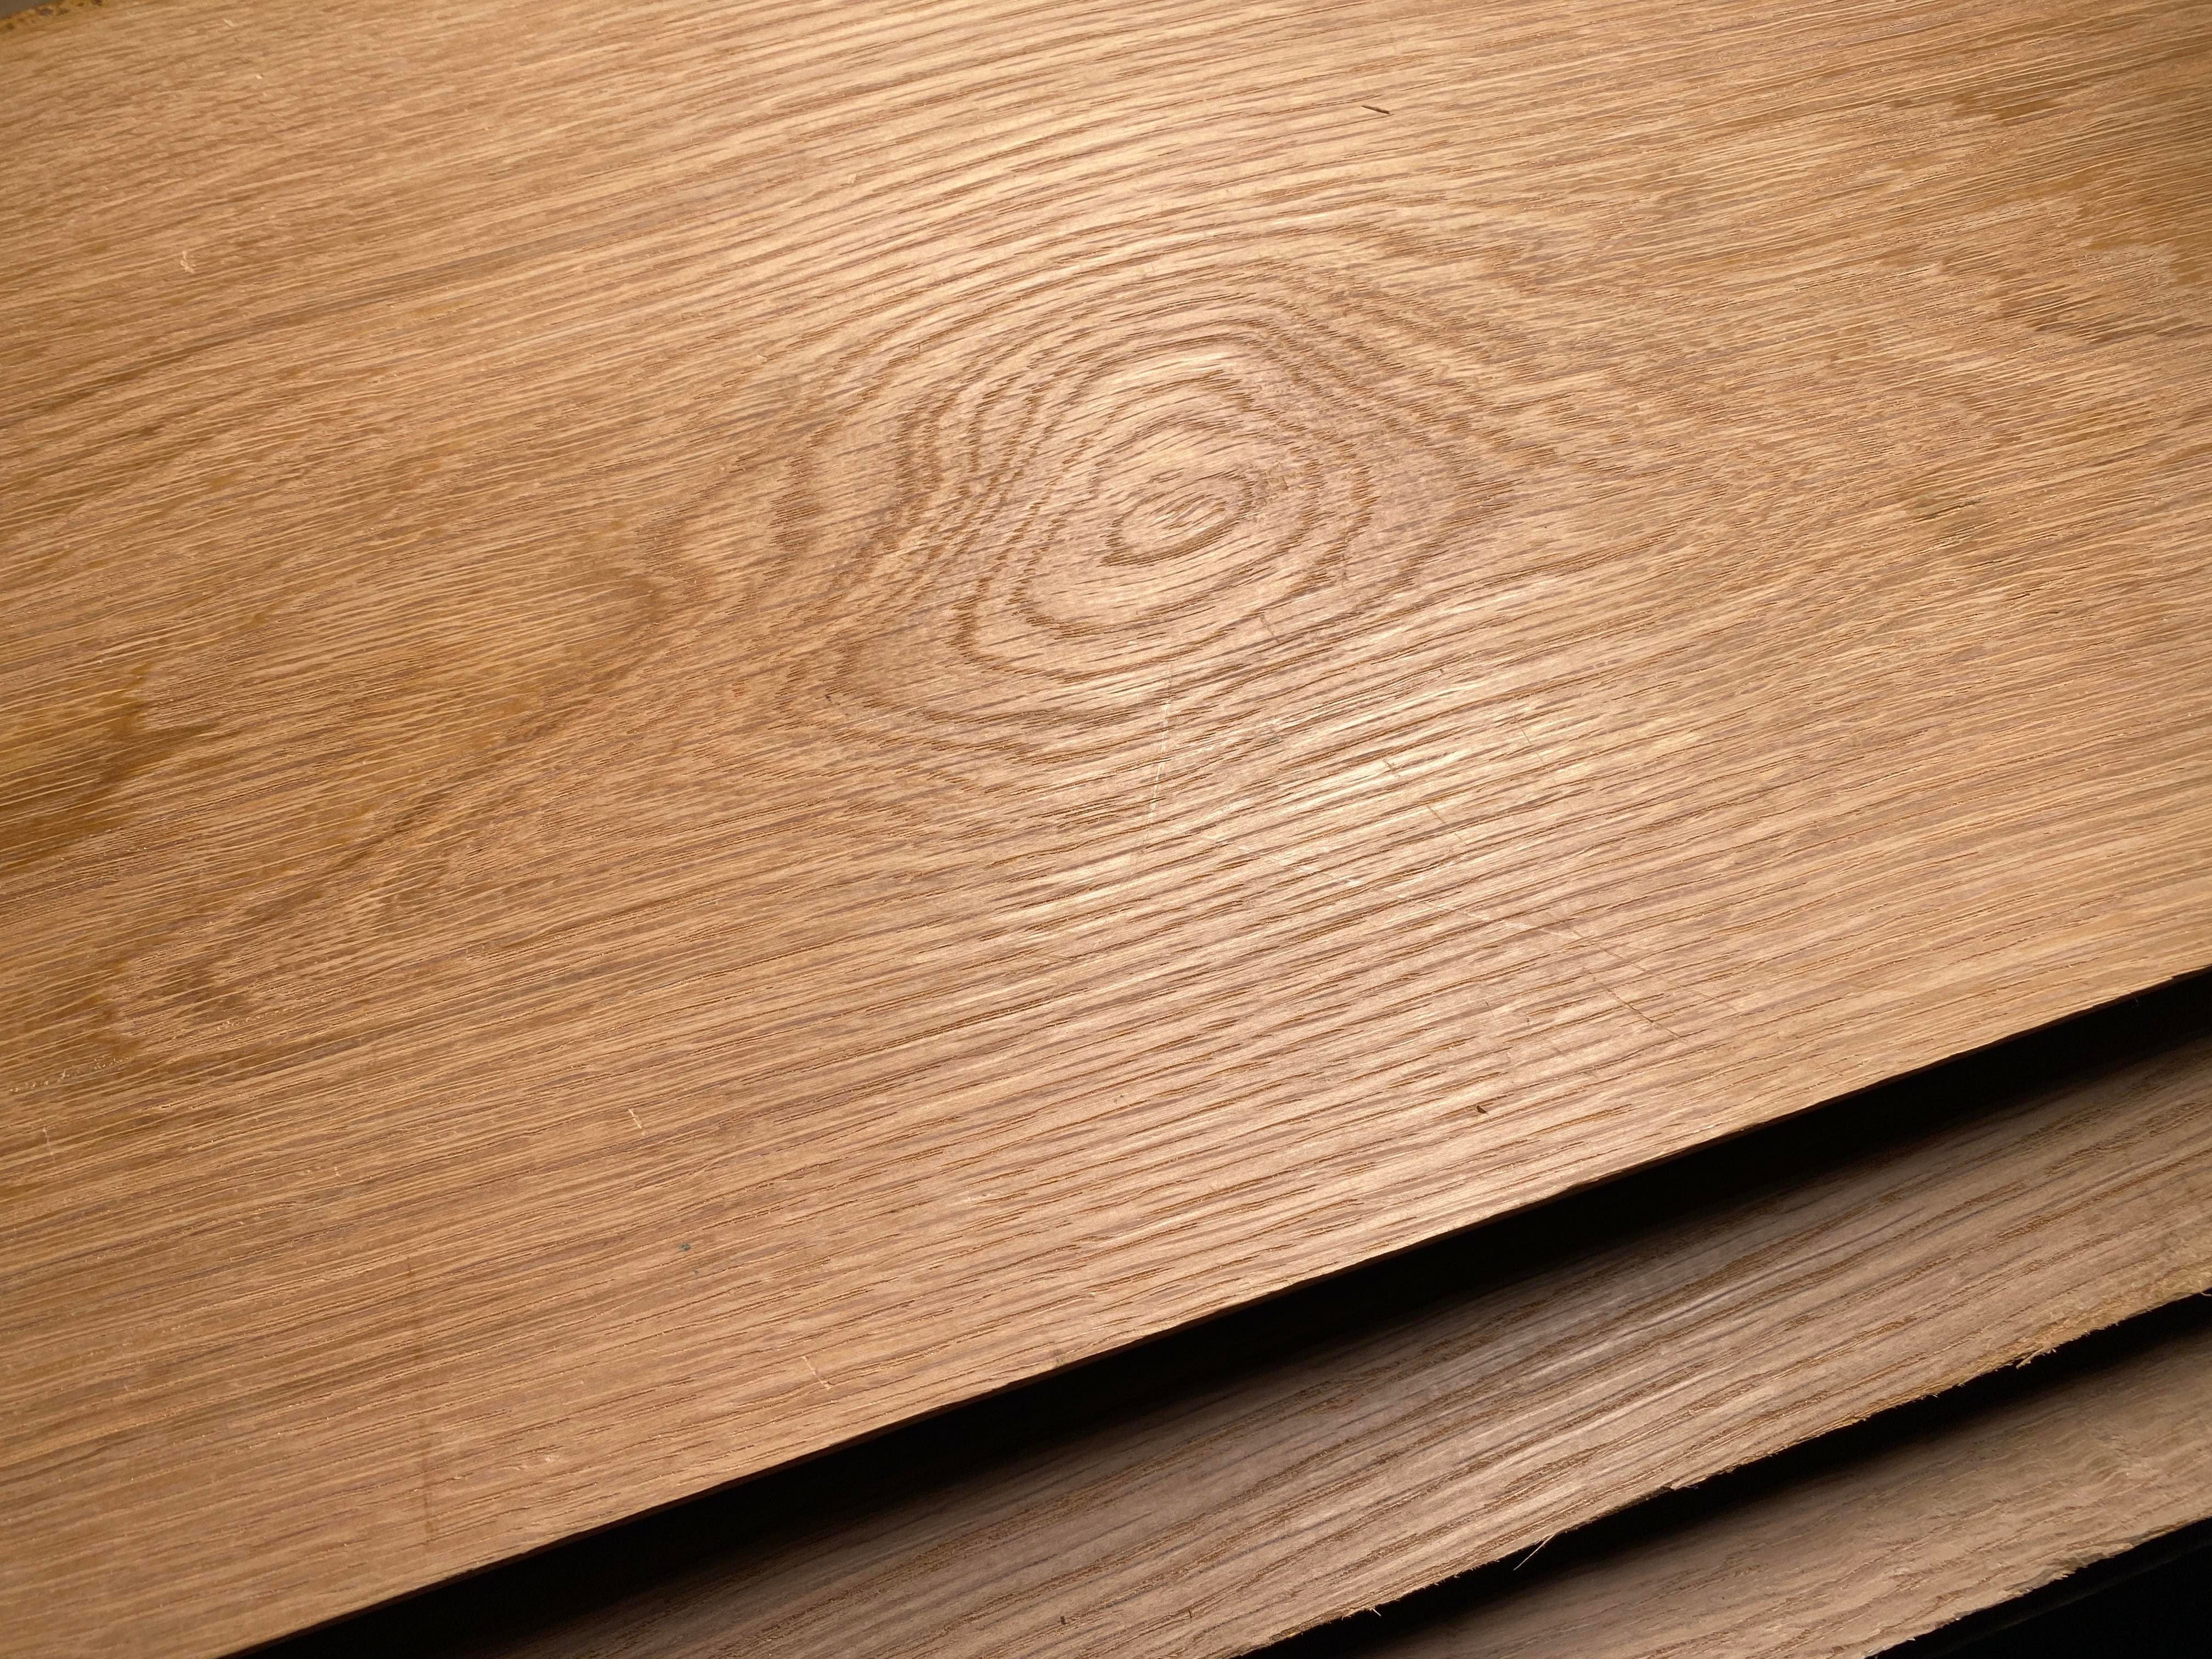 Plain Sawn vs. Rift and Quartered Oak: What's the Difference?